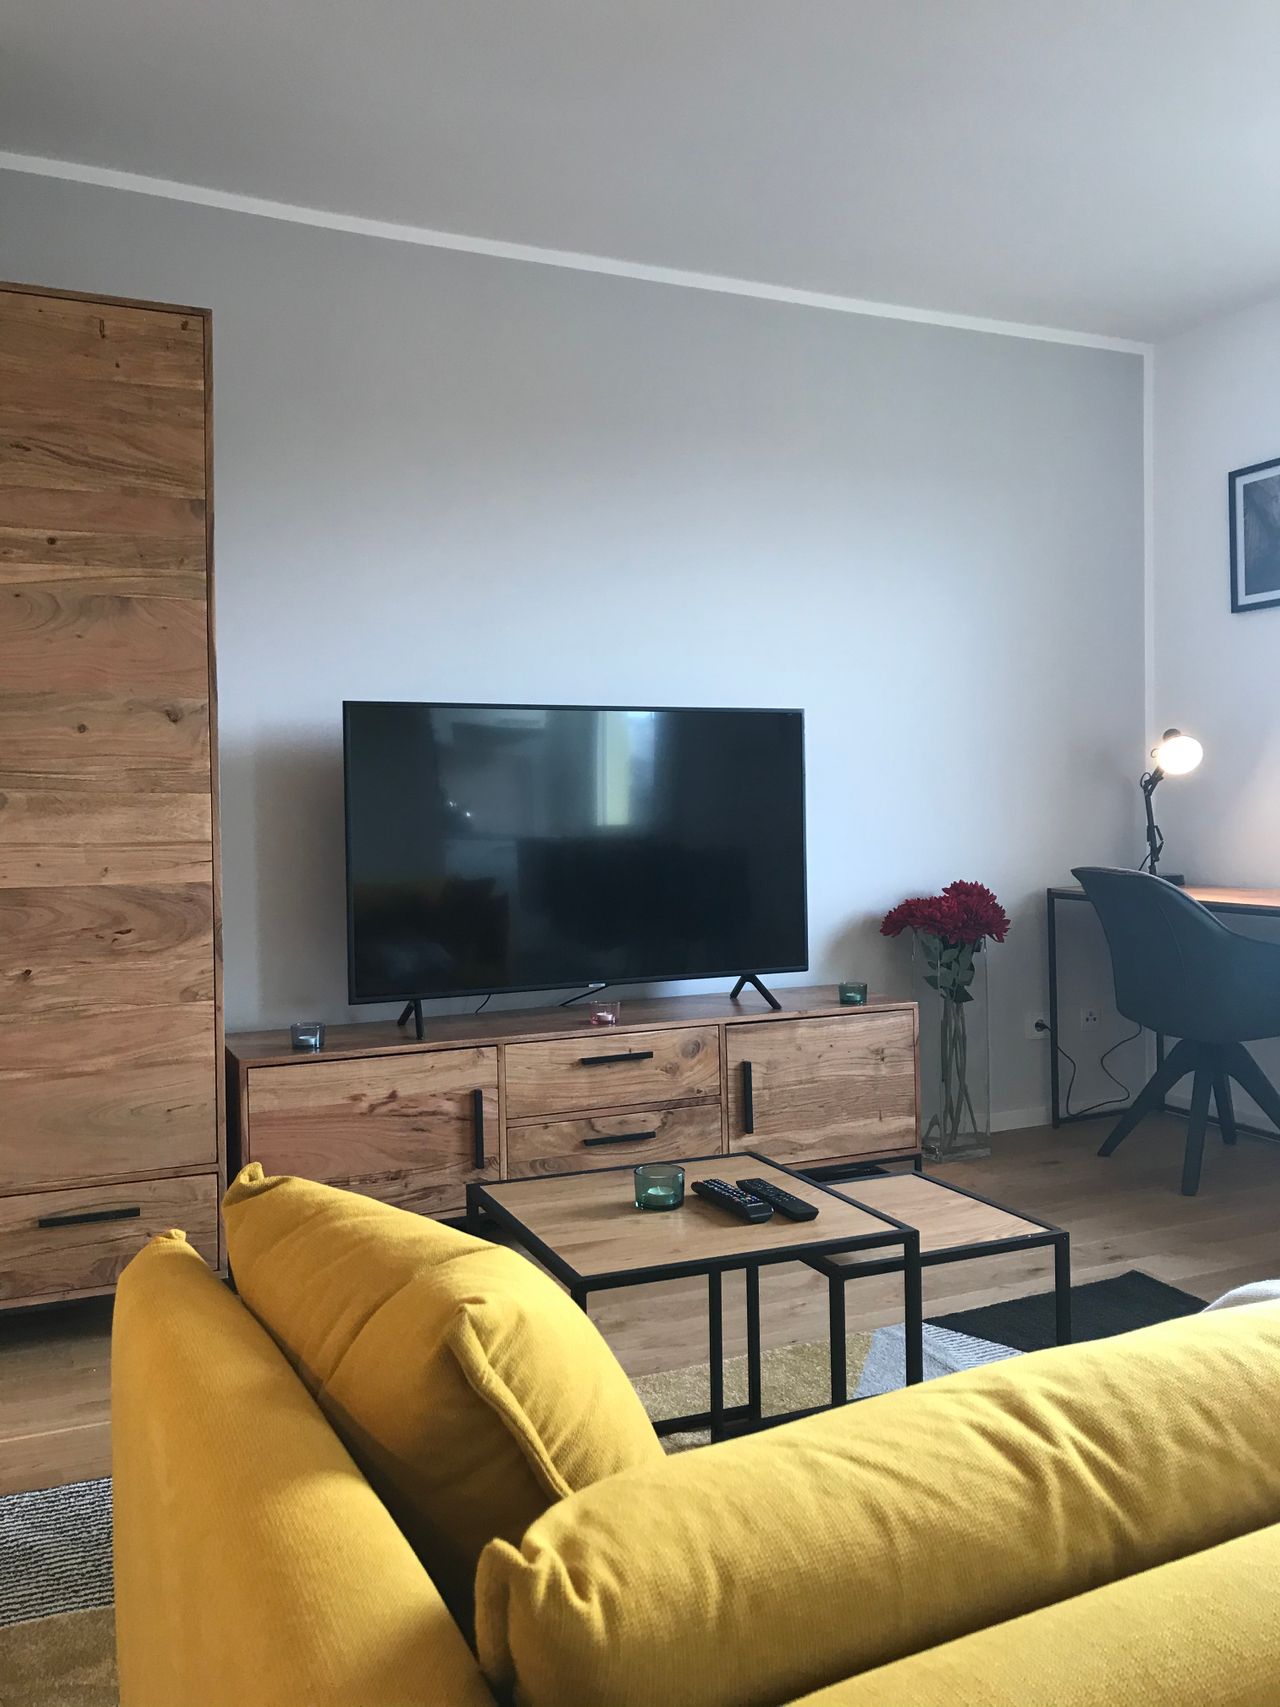 Exclusive furnished apartment next to ECB and S-Bahn